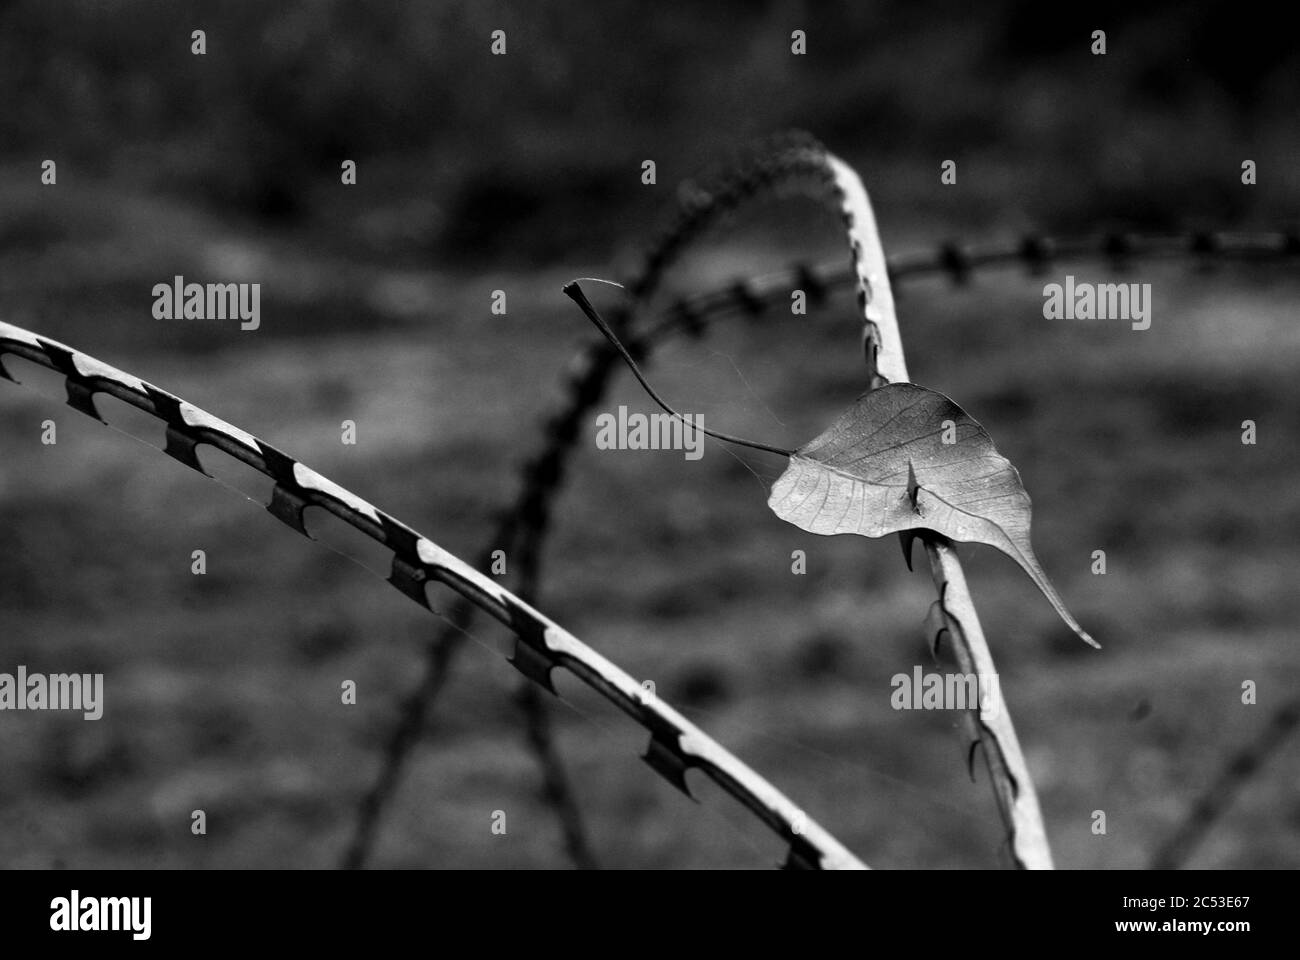 India-Pakistan border, Jammu, India. The sight of chains and barbed wire are common in Jammu & Kashmir, indicating the presence of the armed forces an Stock Photo